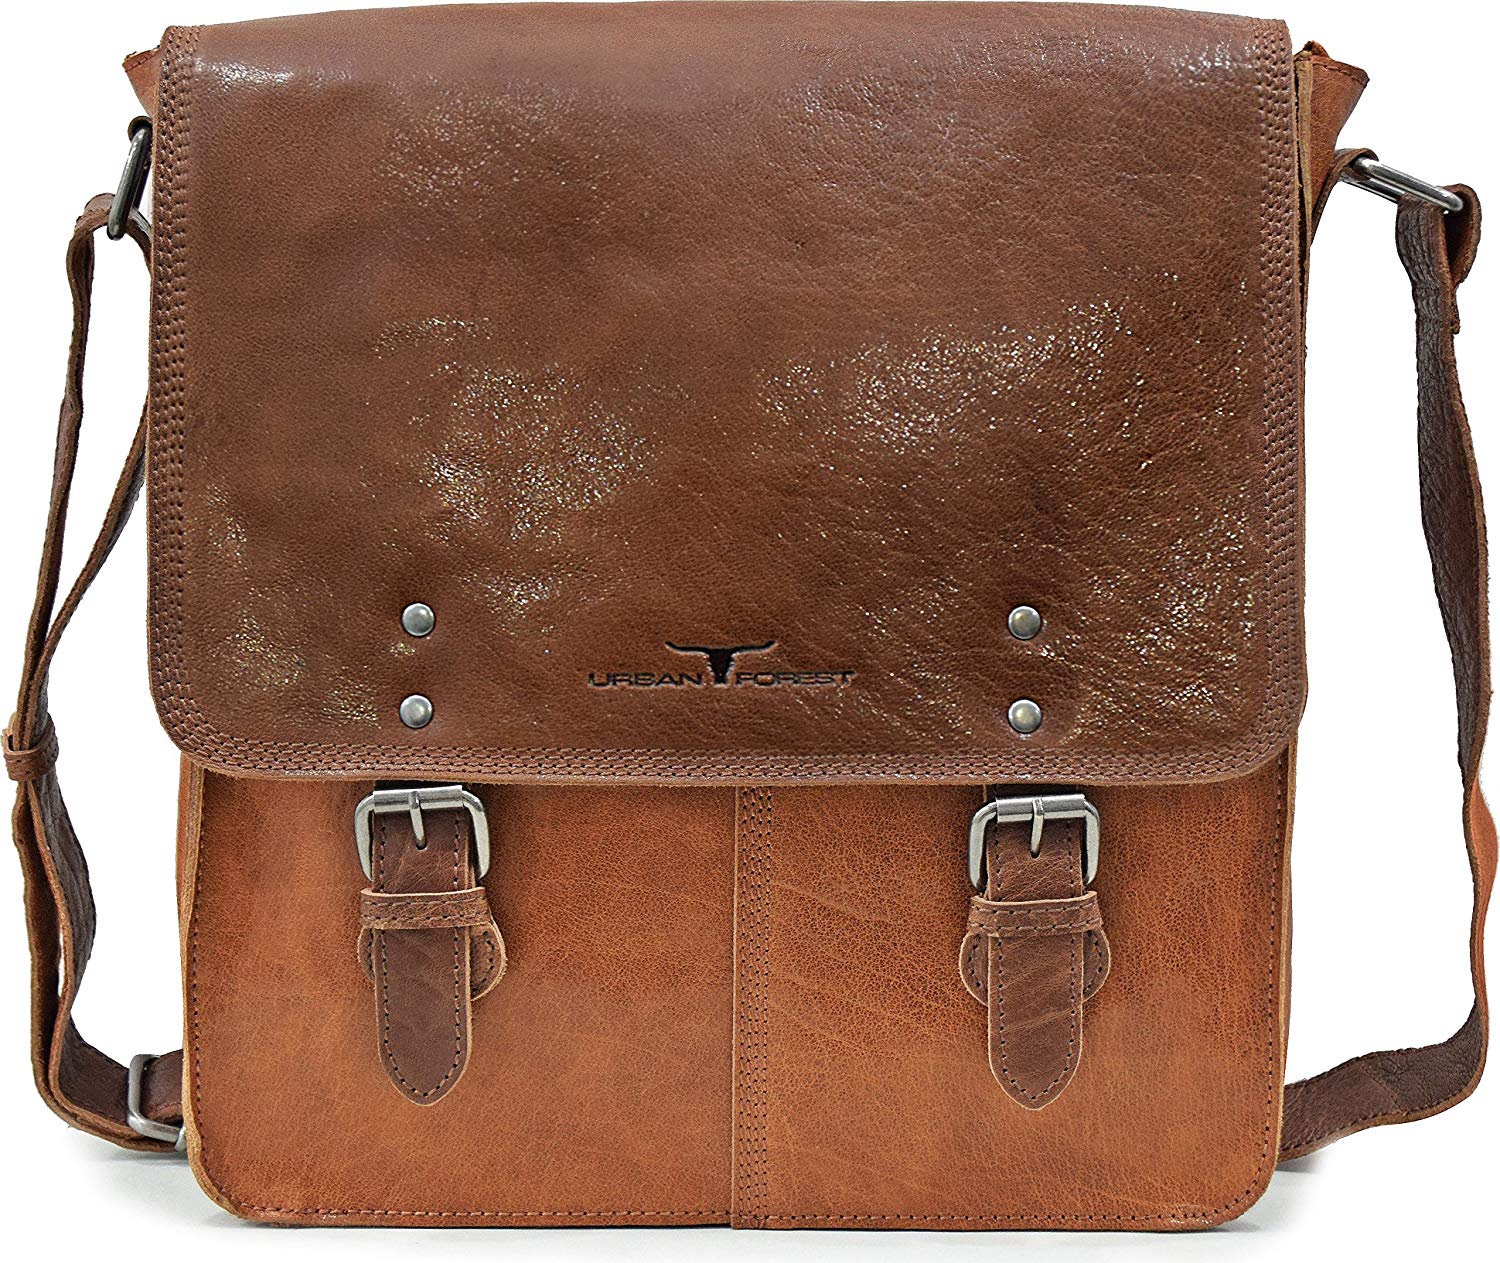 Messenger bag by Dolphin Leathers